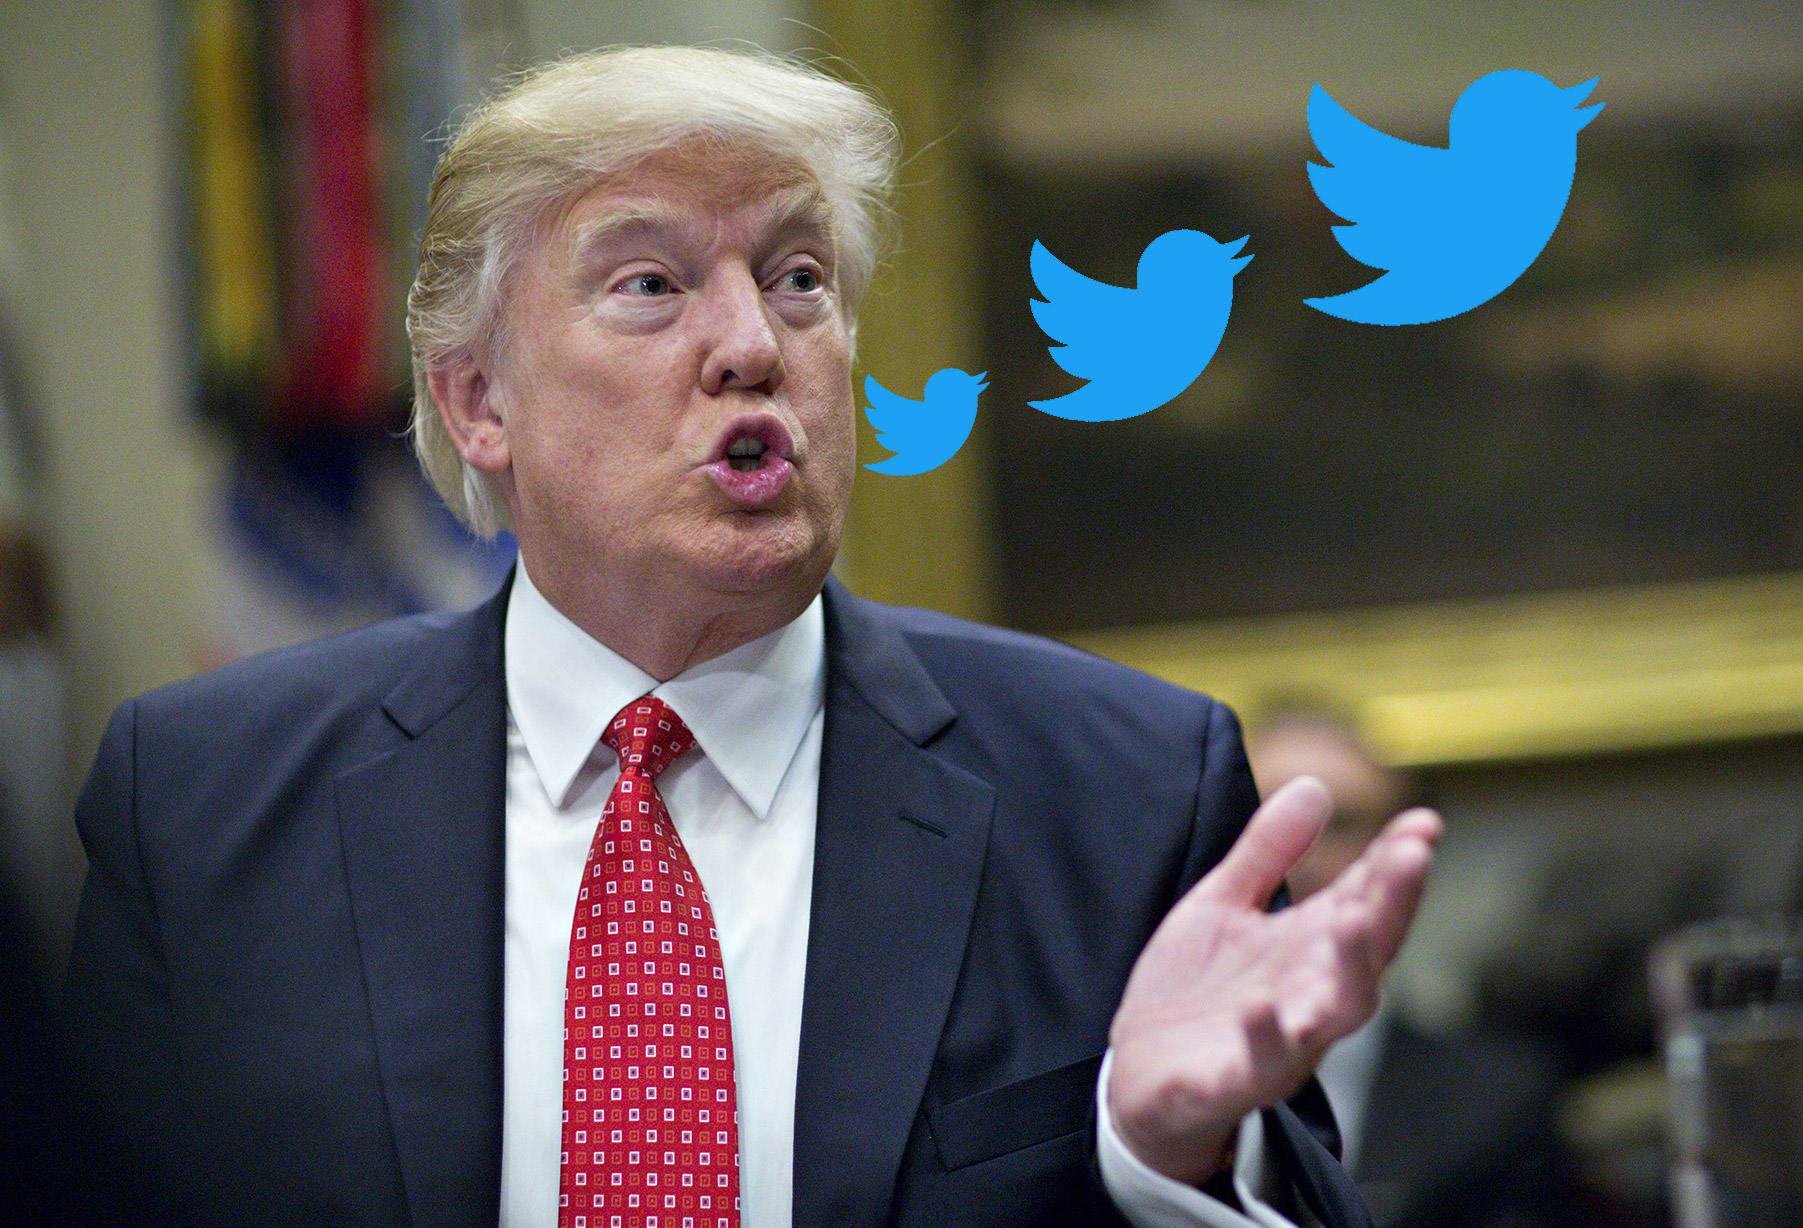 Here's what Musk's potential takeover of Twitter could mean for Trump